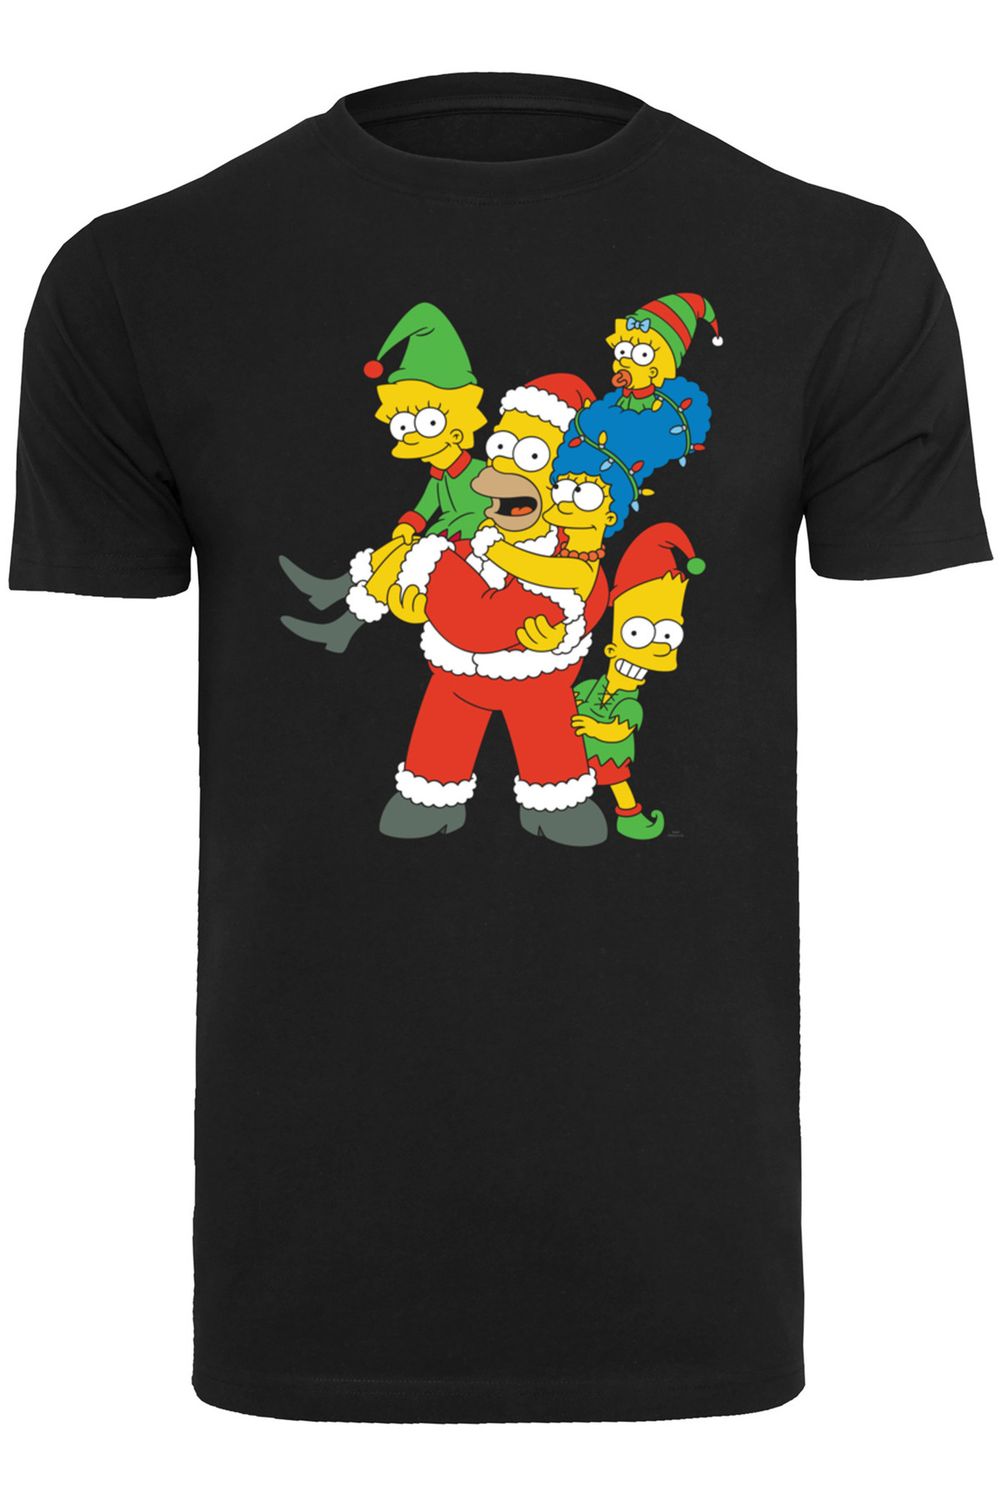 T-Shirt Family -GRY F4NT4STIC Herren - Christmas Trendyol Simpsons Rundhals The mit